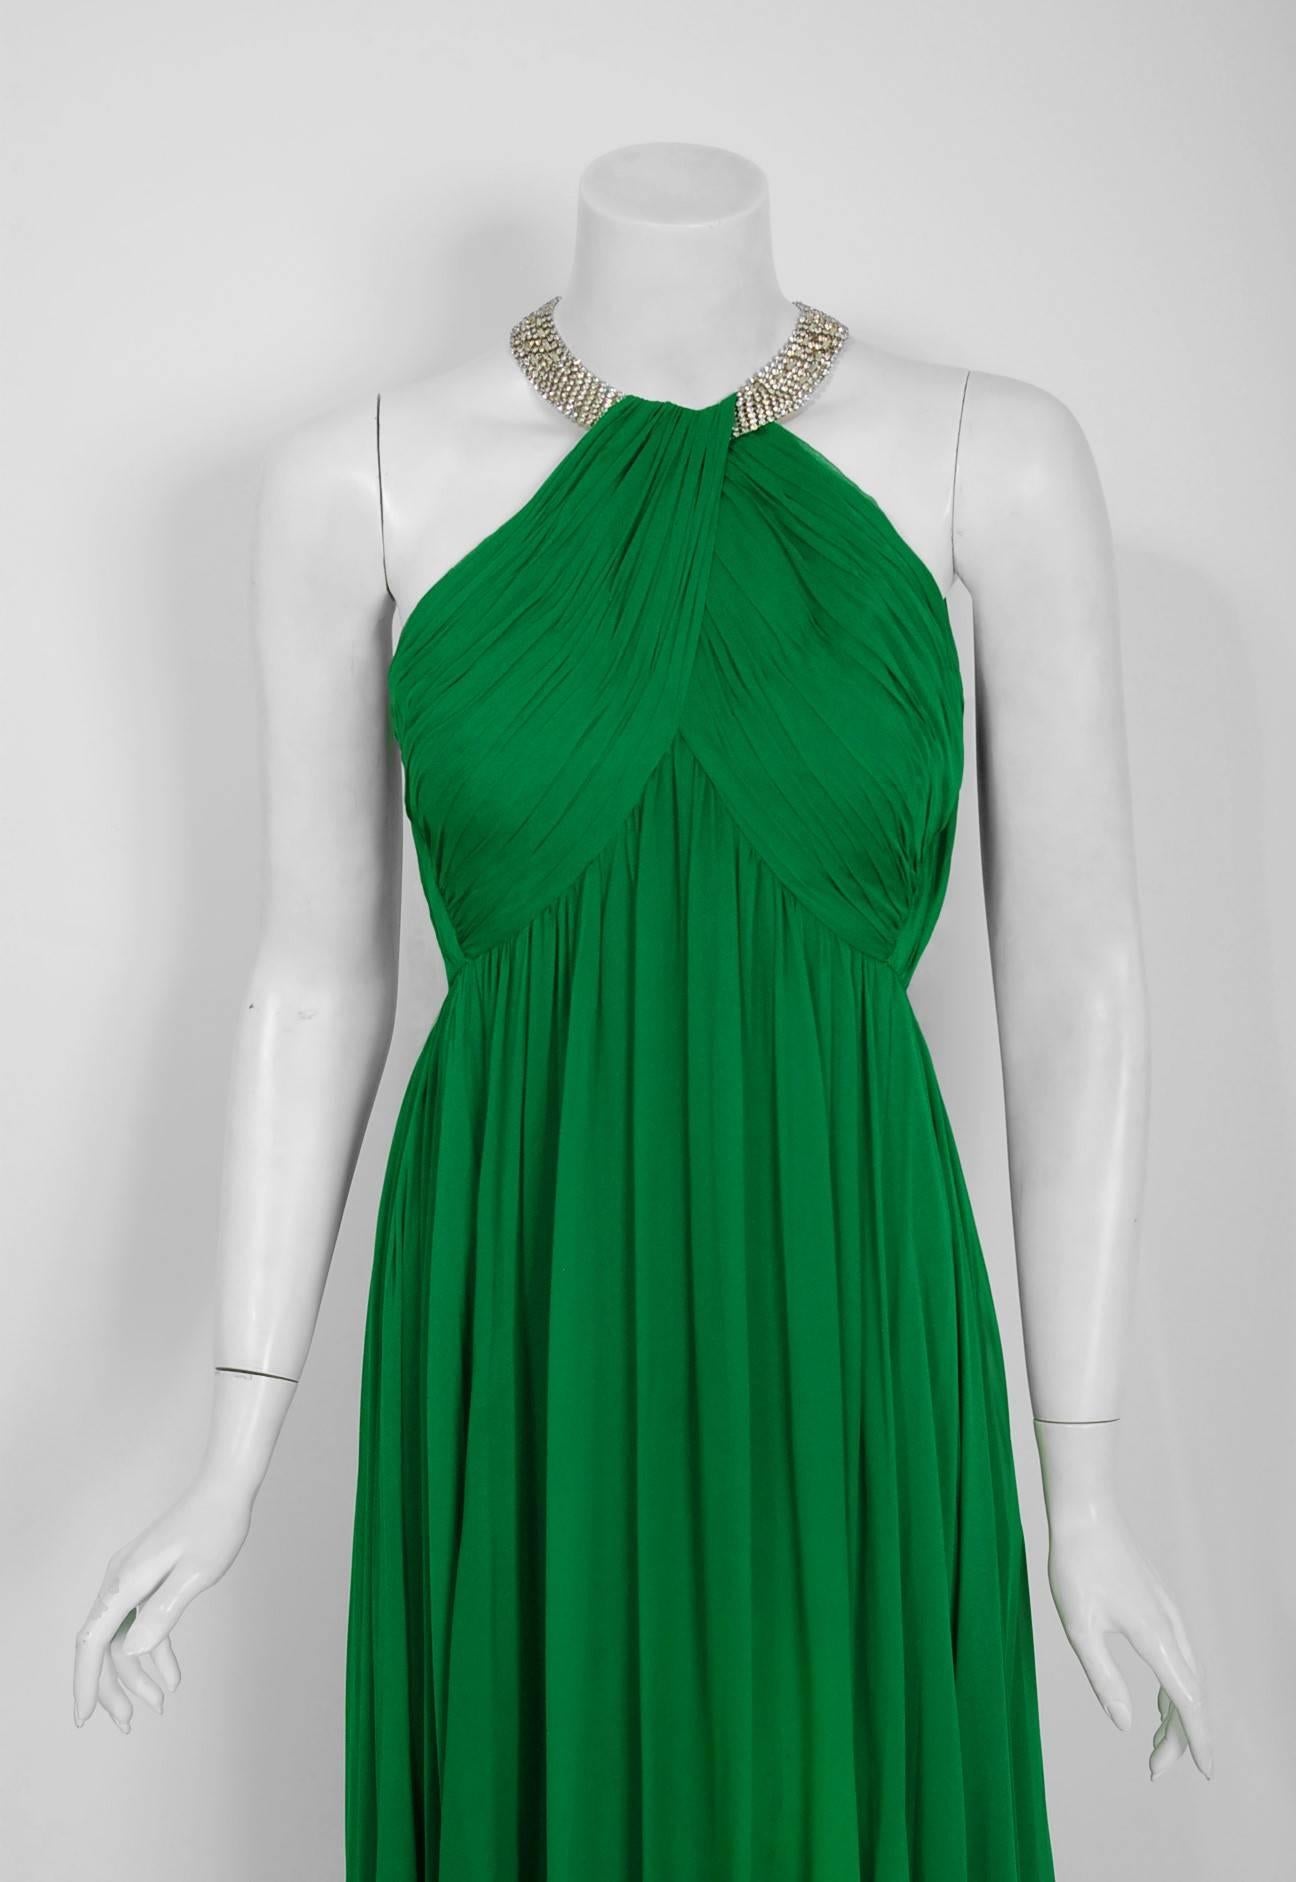 With the sparkling rhinestones and vibrant emerald-green color, this dazzling 1960's Malcolm Starr evening gown does not disappoint. The substantial weight of the layered silk-chiffon fabric whispers high-end luxury. The bodice is an elegant